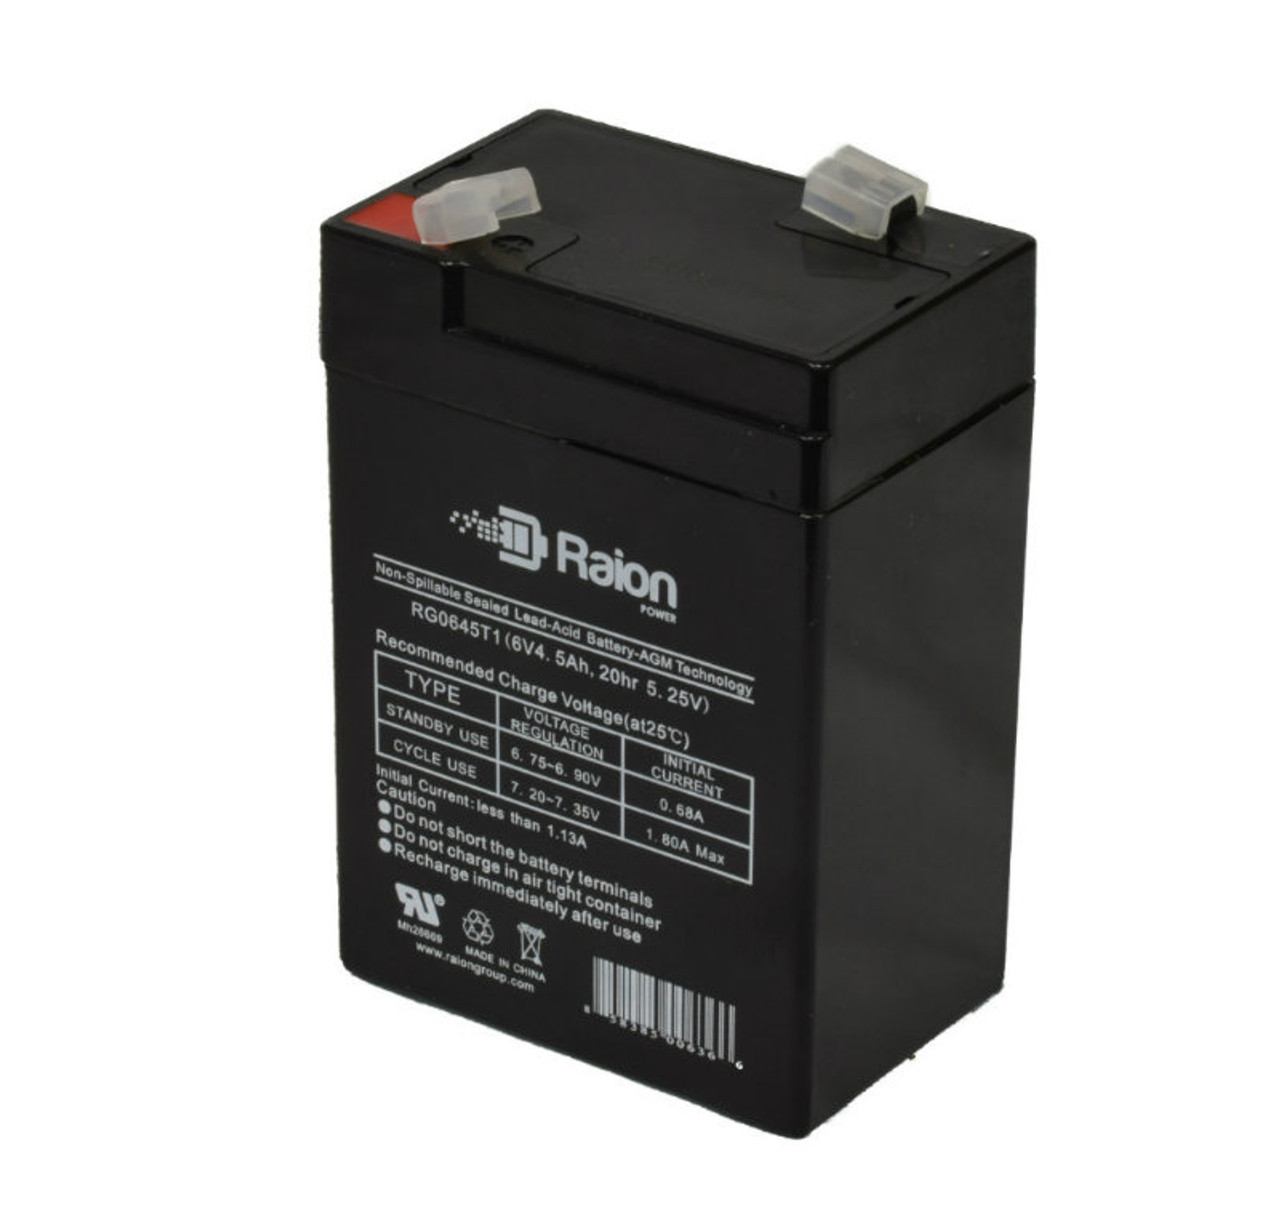 Raion Power RG0645T1 6V 4.5Ah Replacement Battery Cartridge for Astralite 20-0008